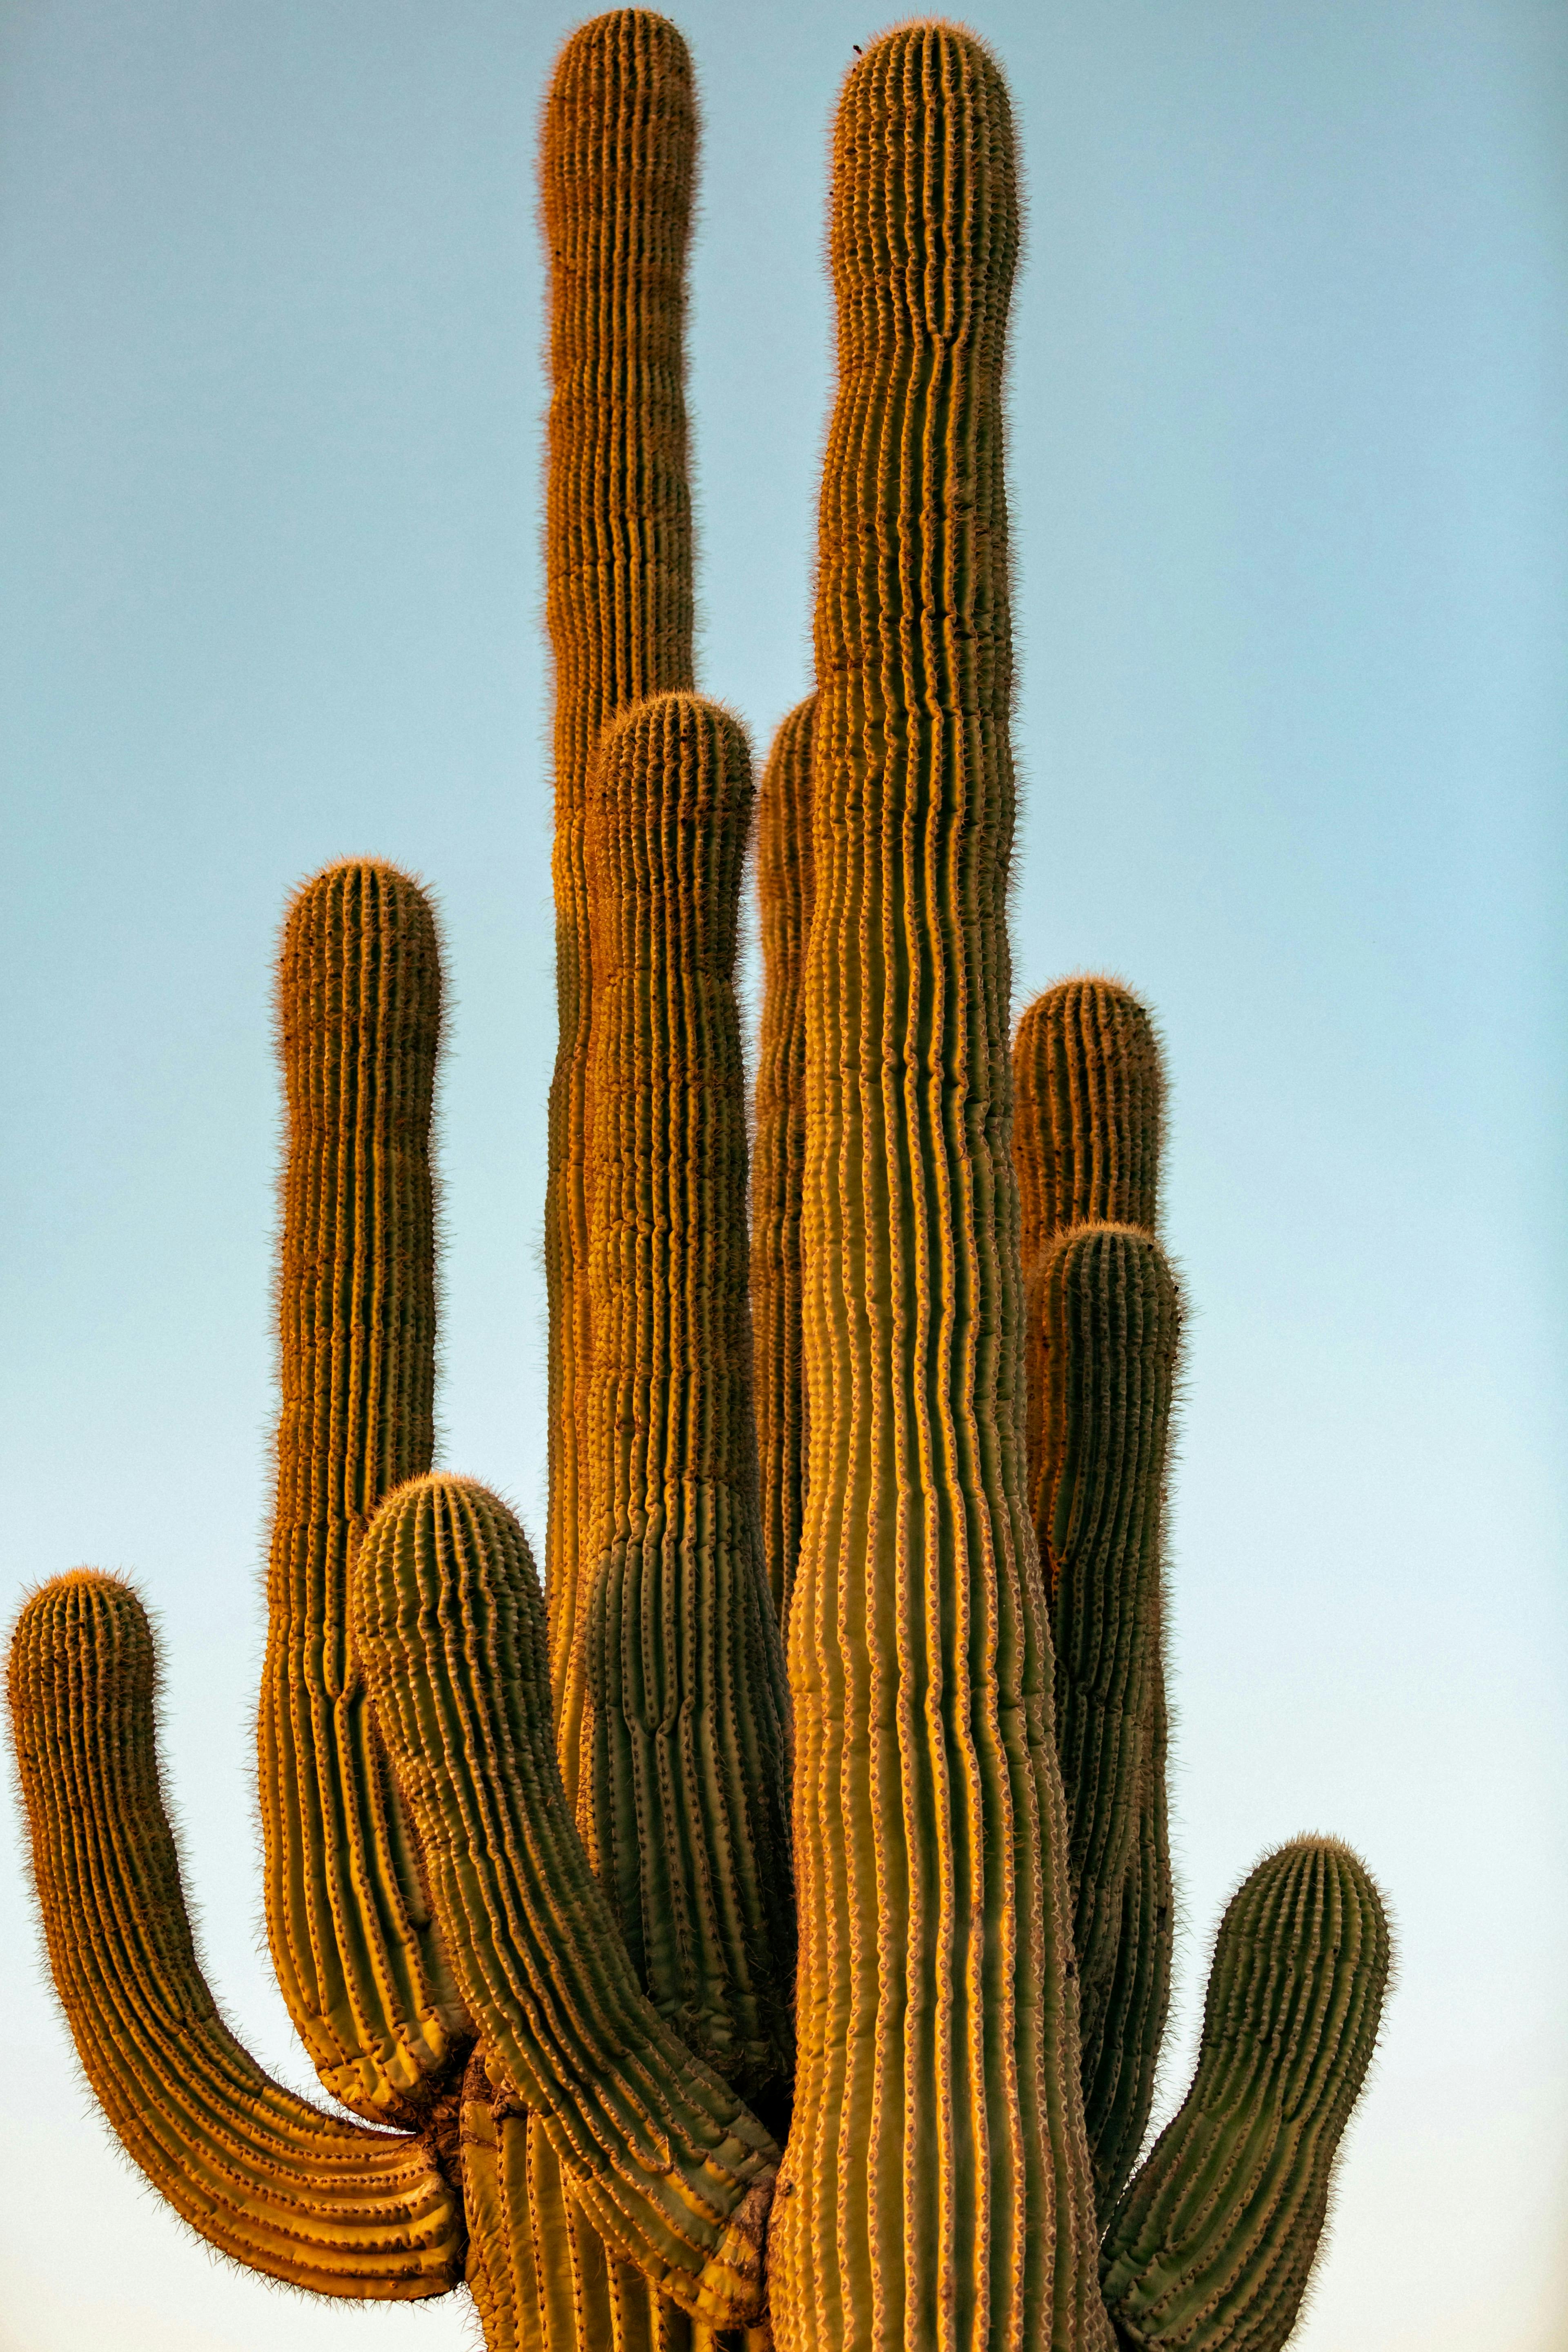 a group of tall cactus